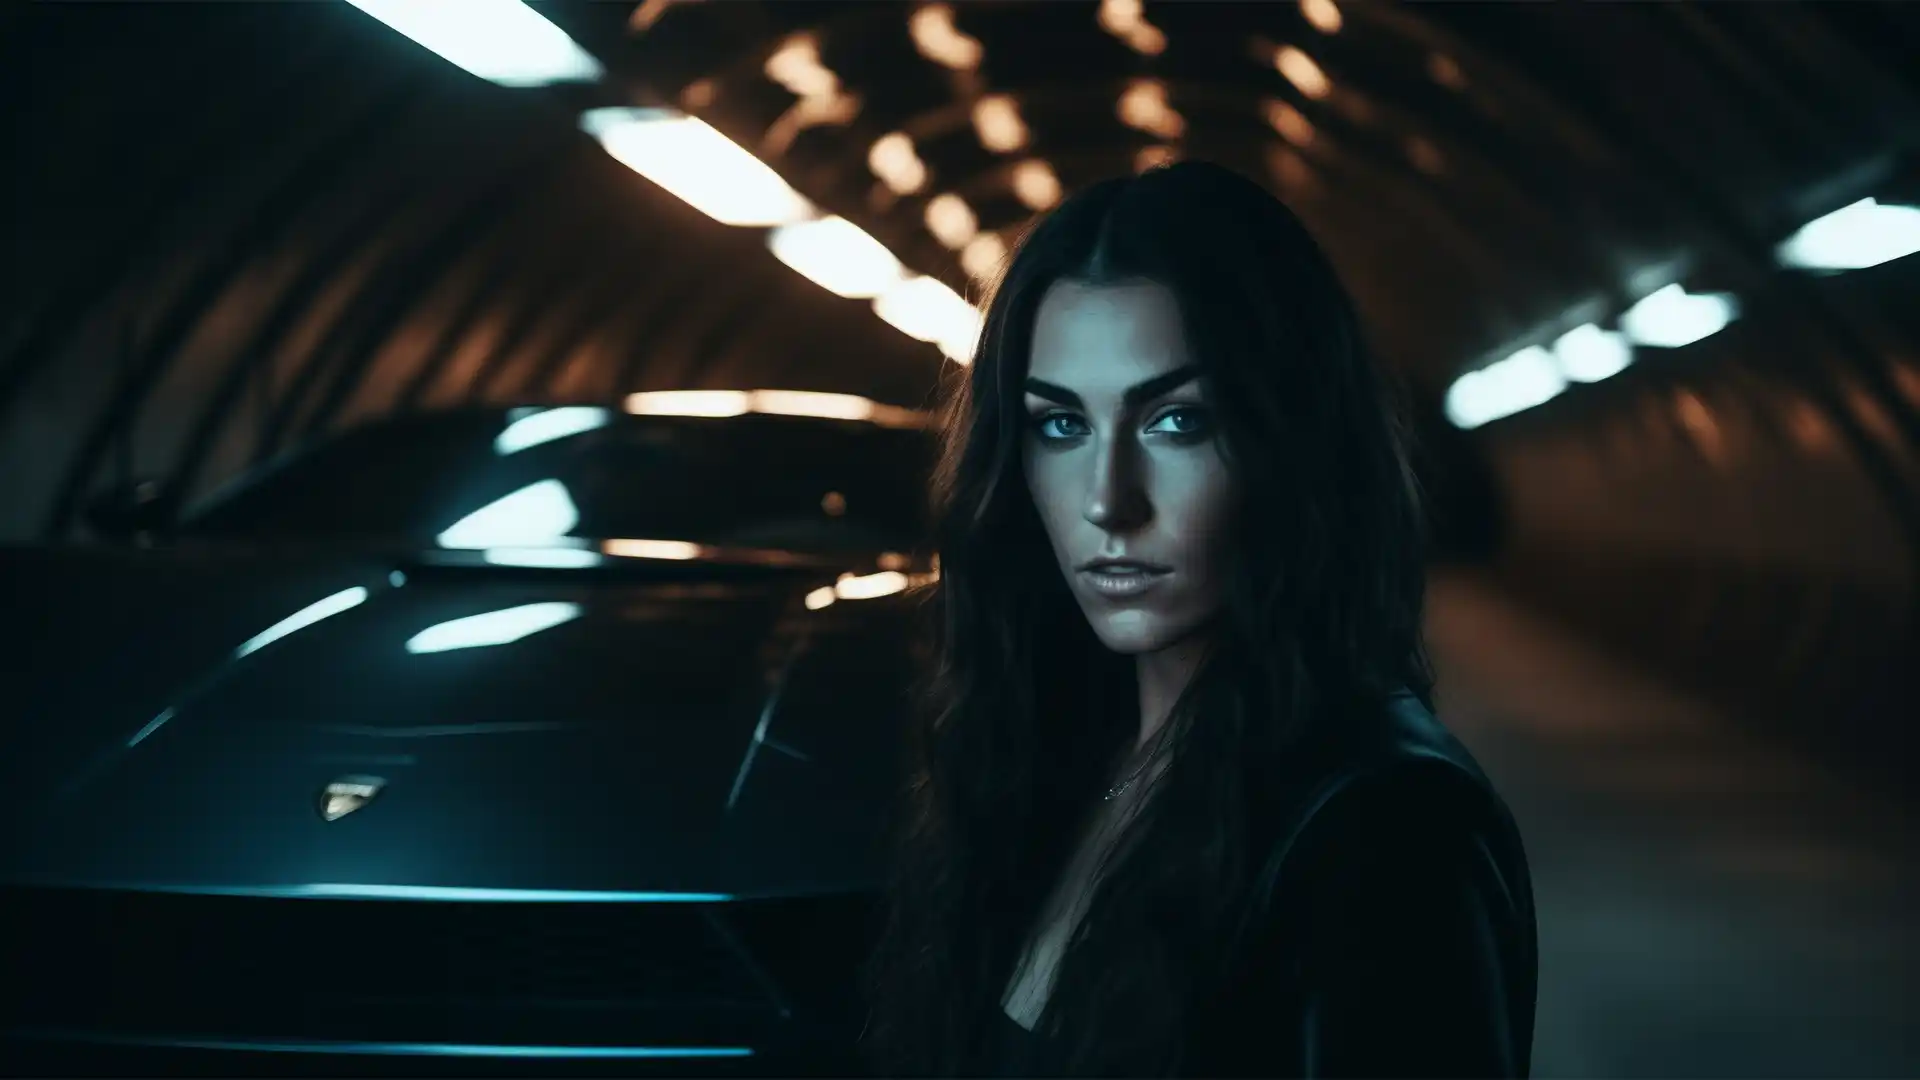 Cinematic shot of a fierce woman in black with flowing hair, standing in front of a black Lamborghini in a tunnel.